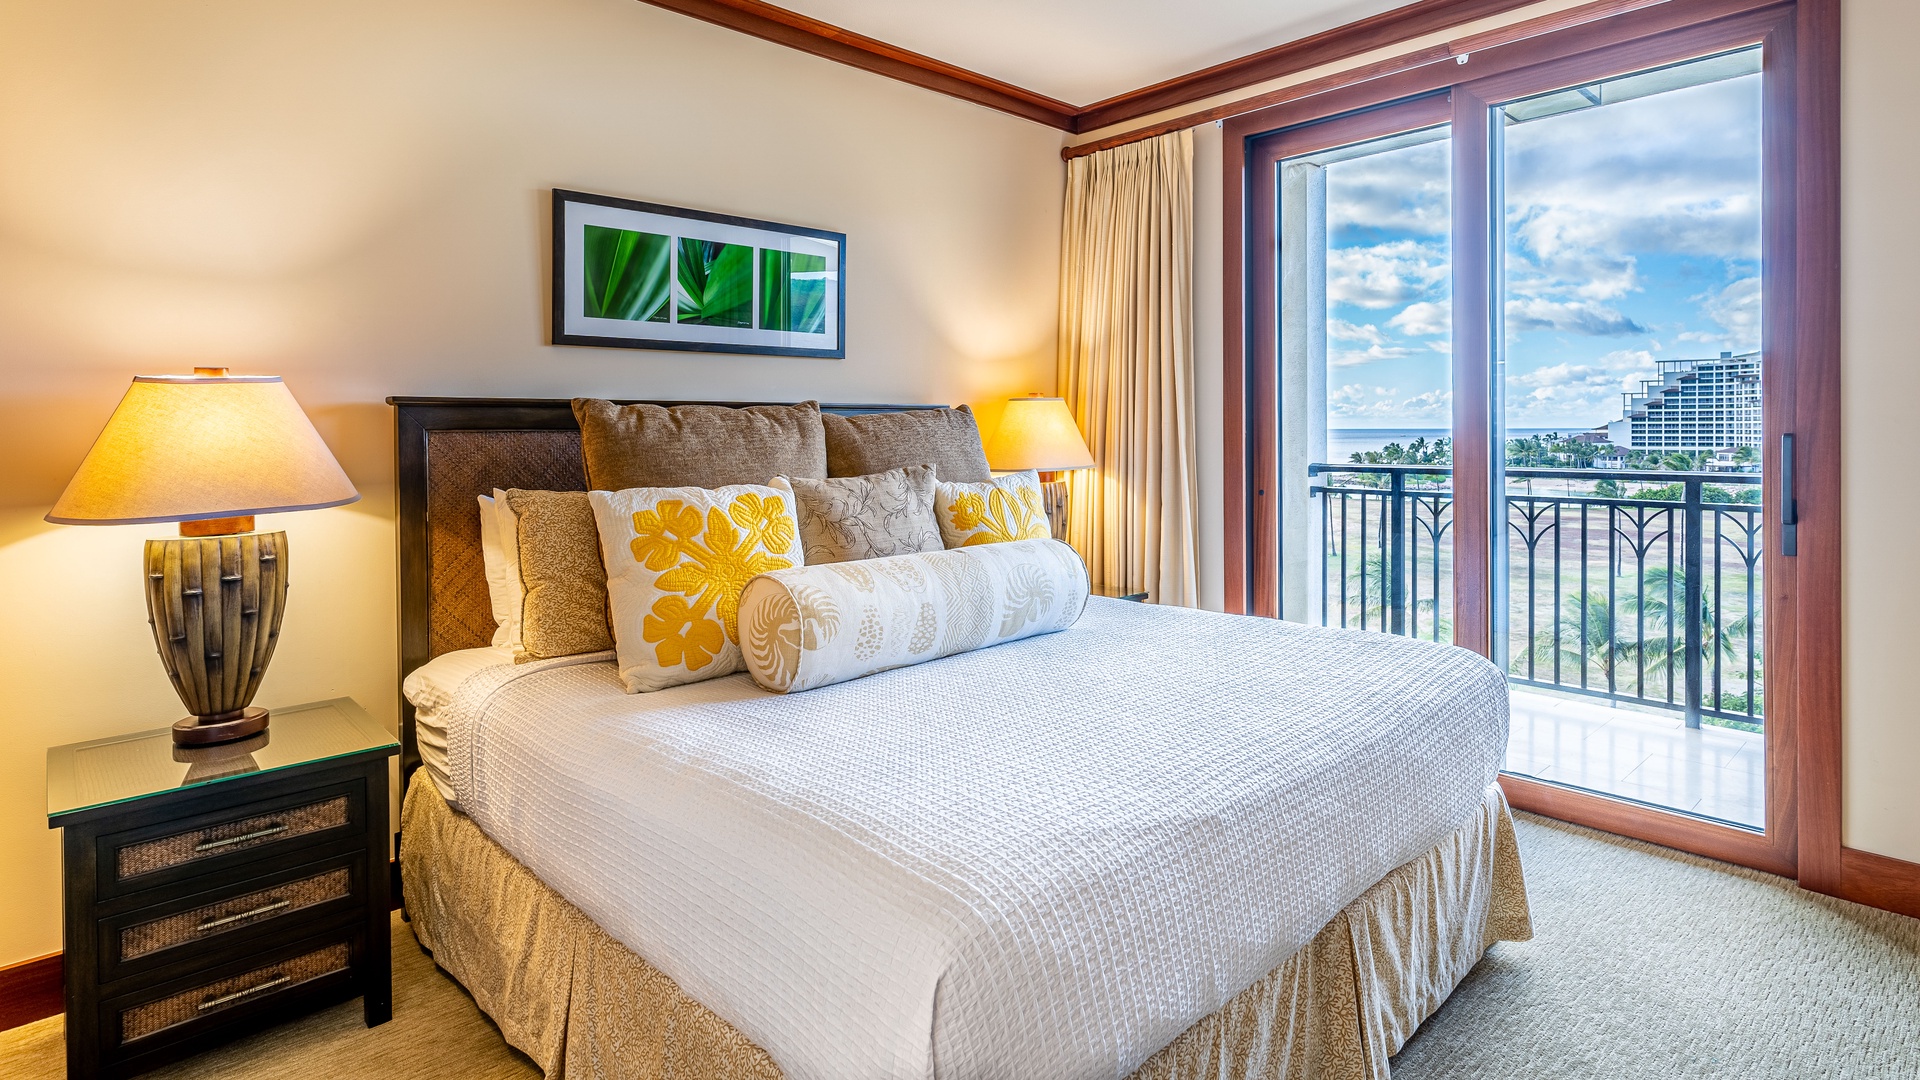 Kapolei Vacation Rentals, Ko Olina Beach Villas B706 - The primary guest bedroom features access to the lanai and designer touches.